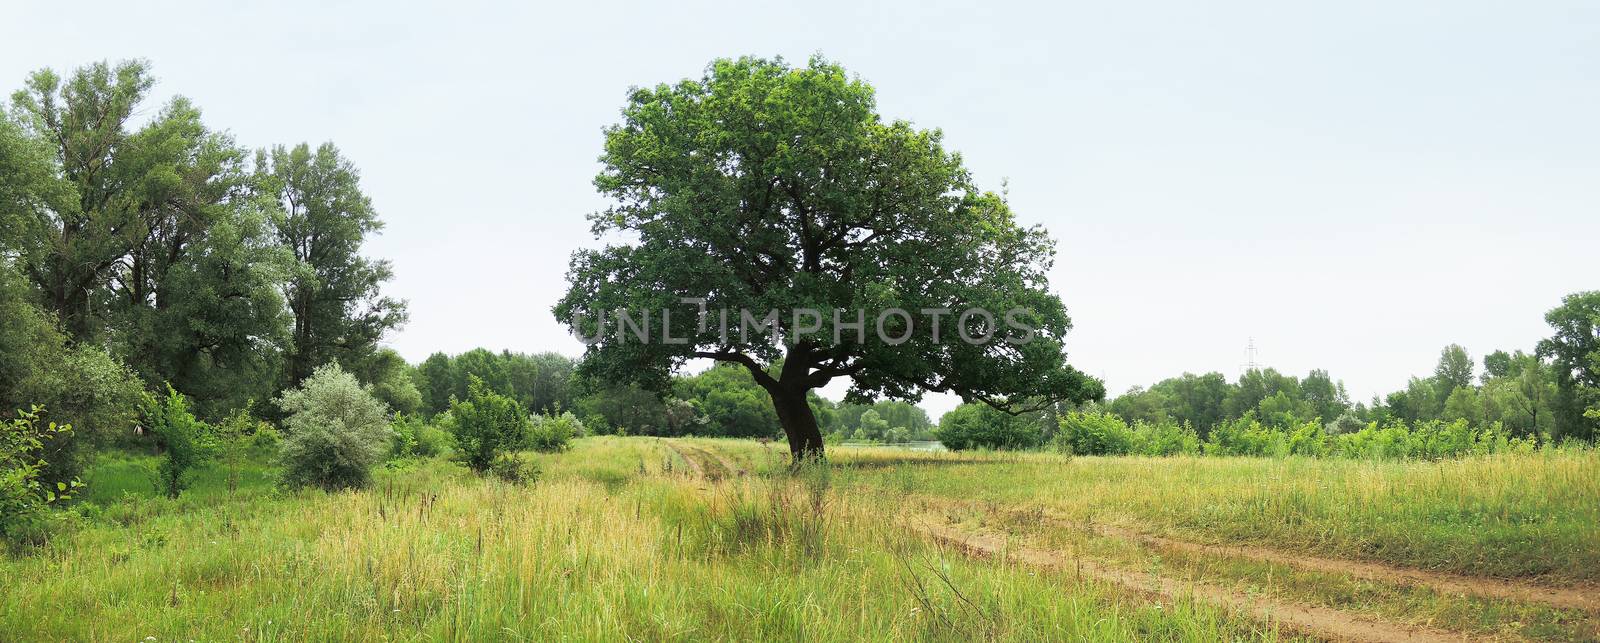 oak next to the road on a summer day by butenkow